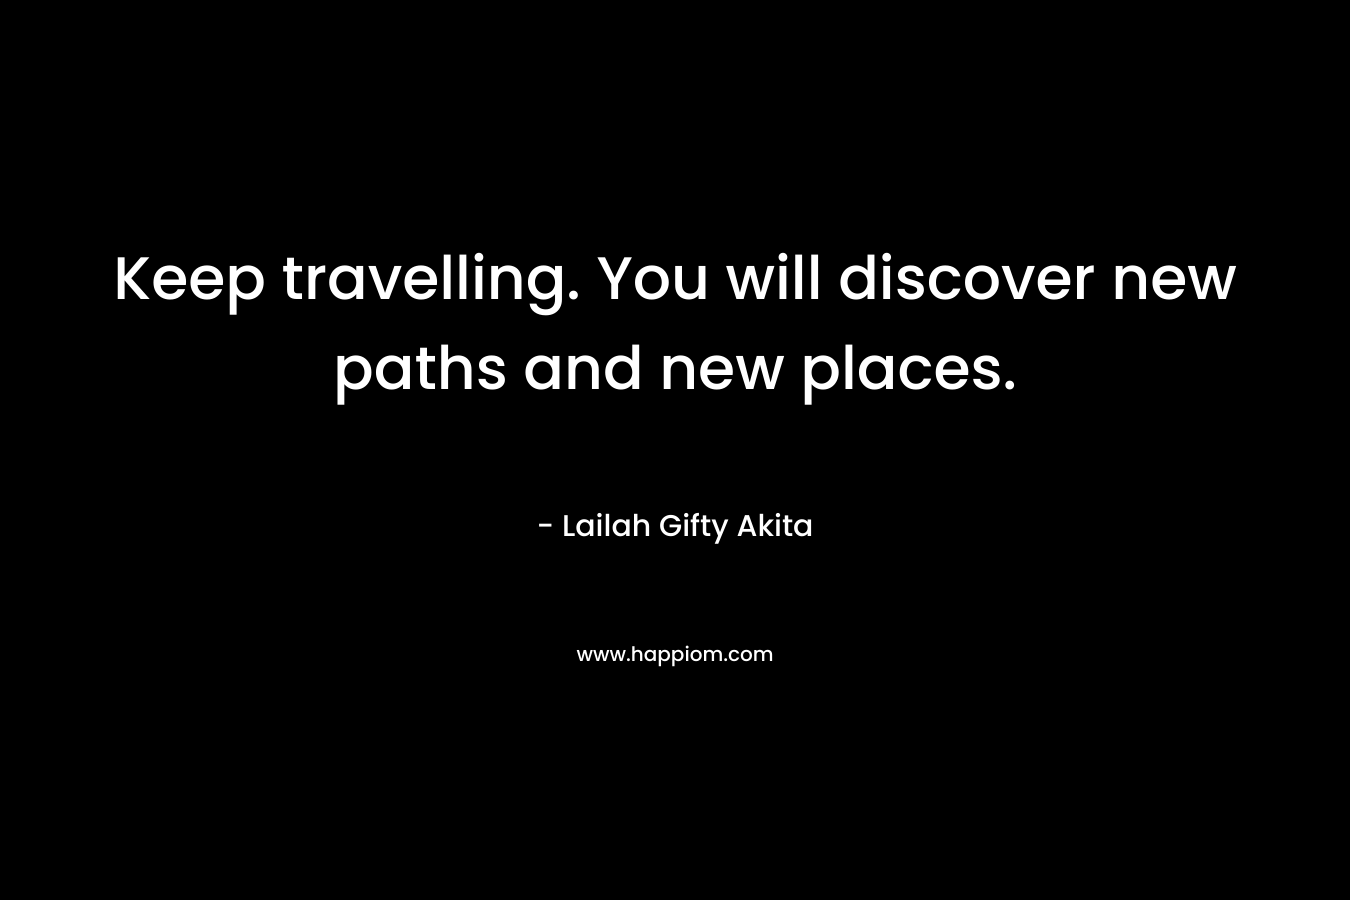 Keep travelling. You will discover new paths and new places.